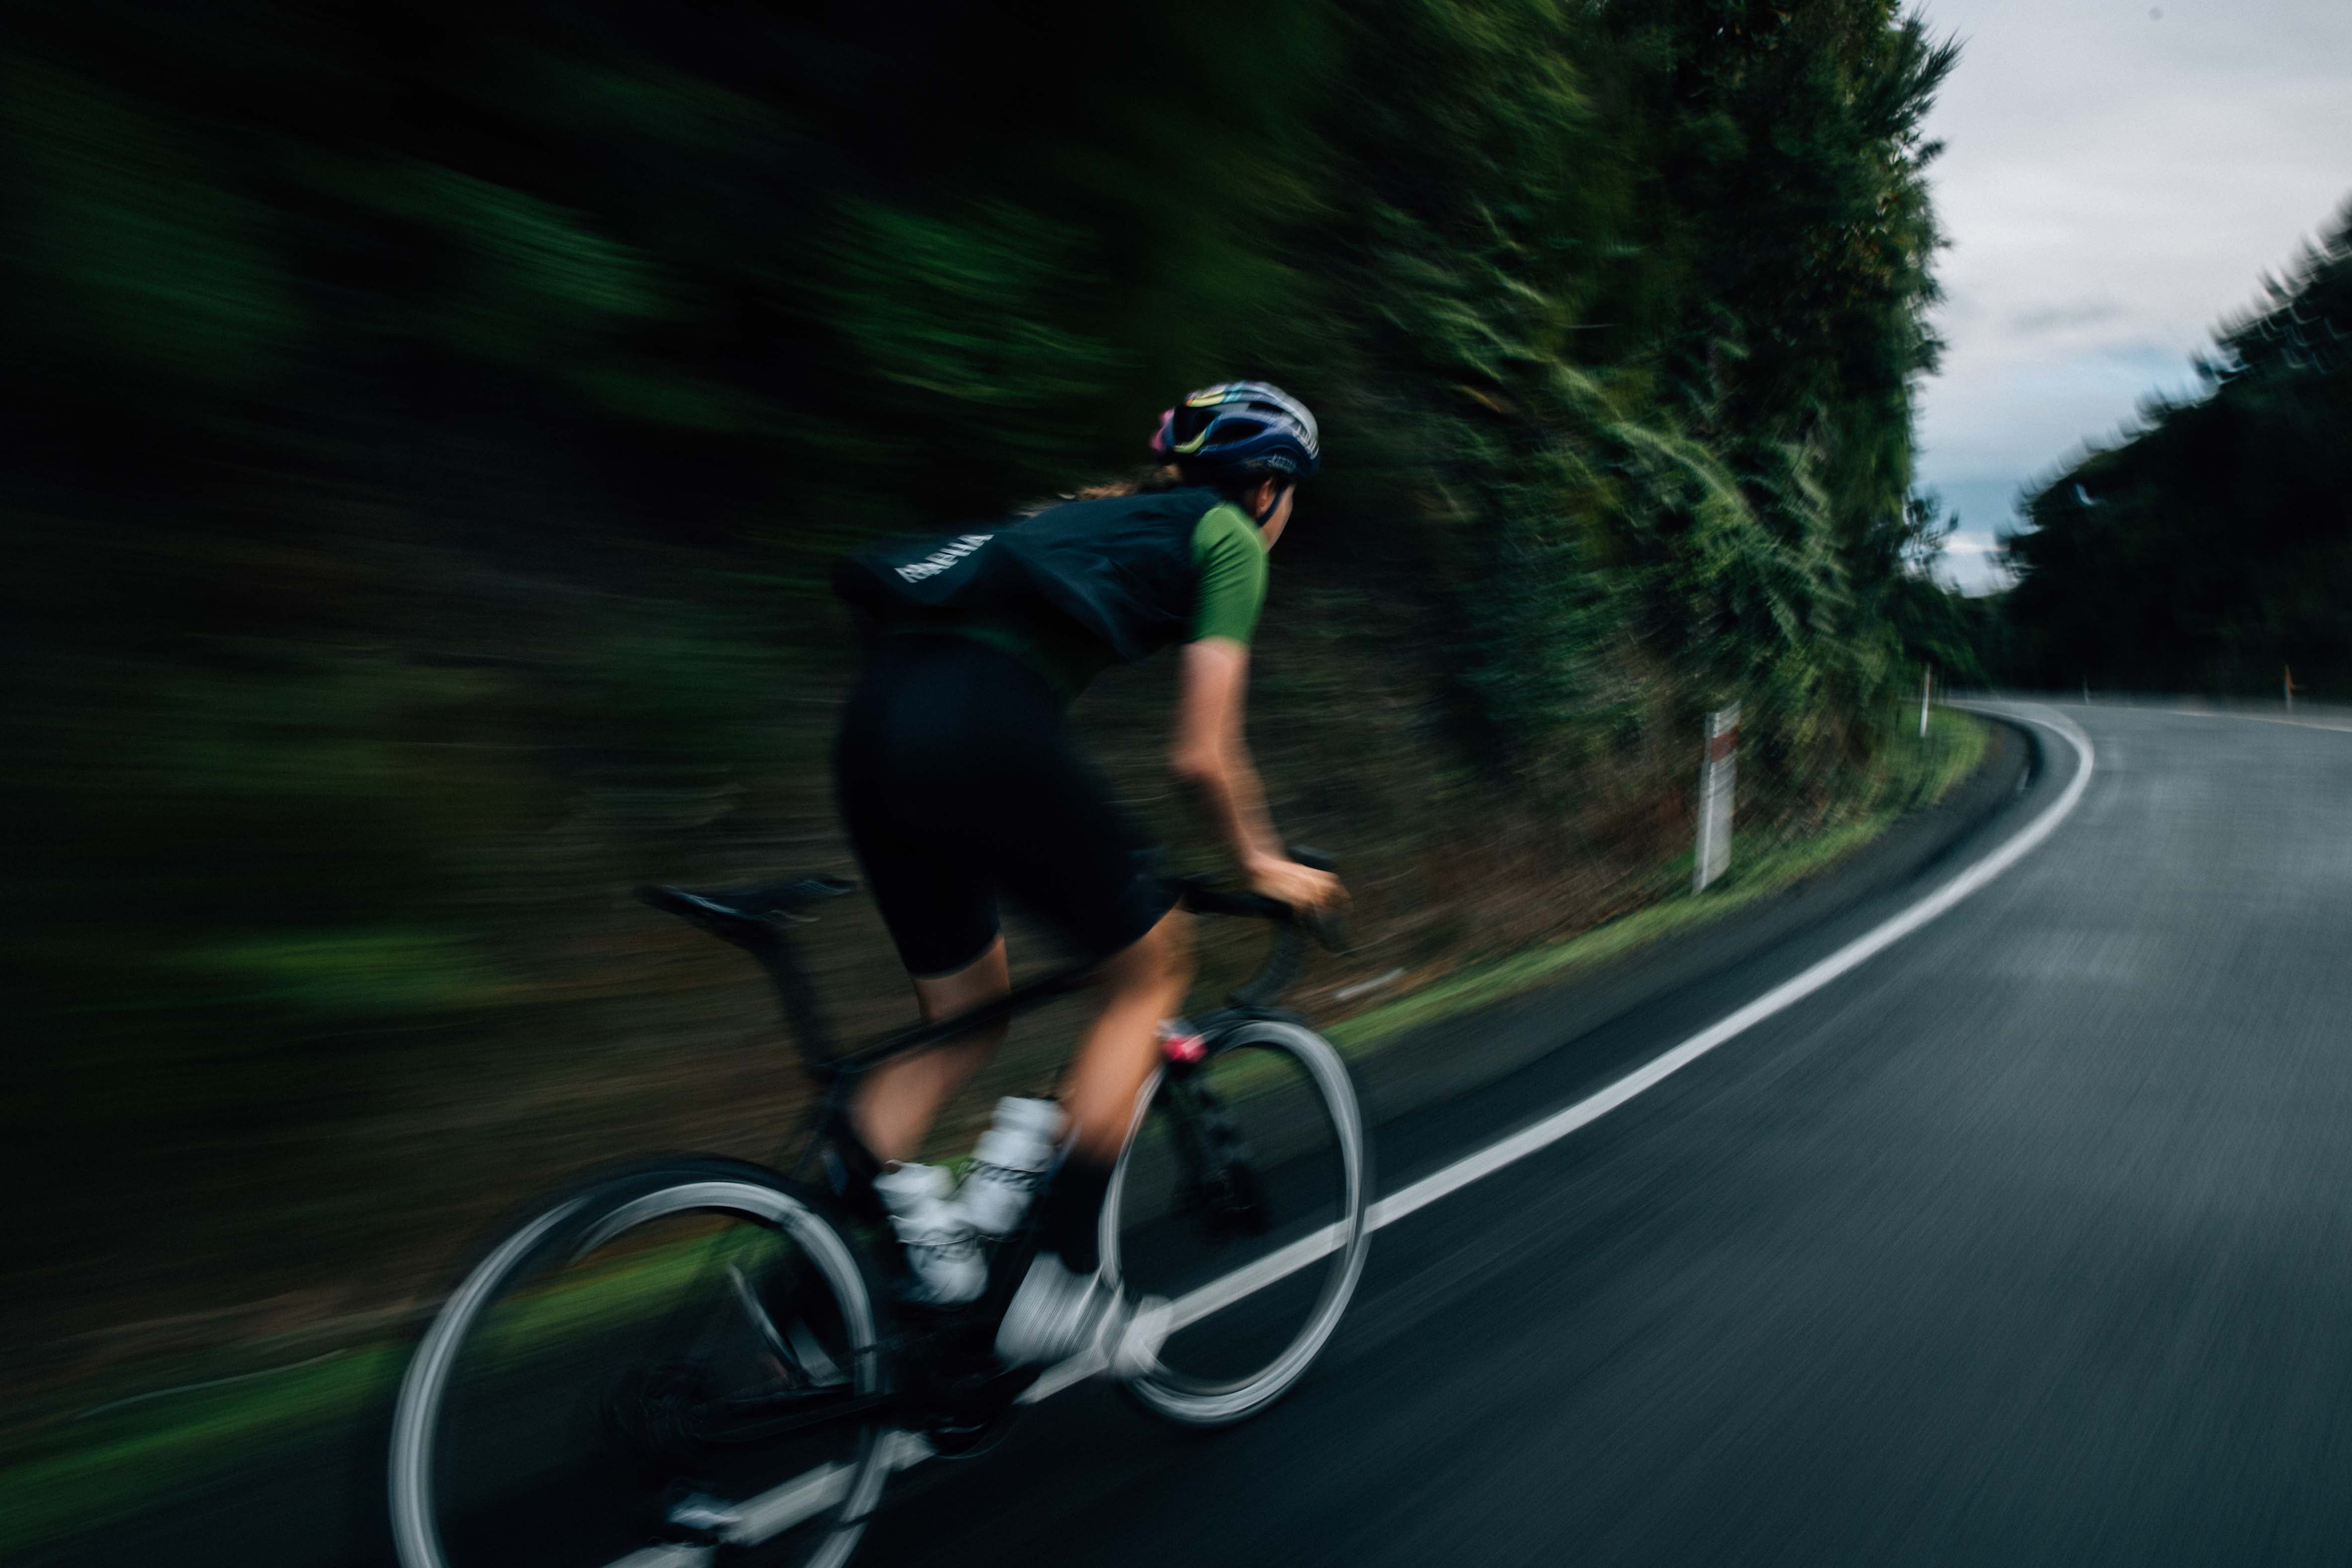 Blur of a cyclist speeding through a lush forested area, representing the dynamic service and expert bike care provided by Bici @ Bici.